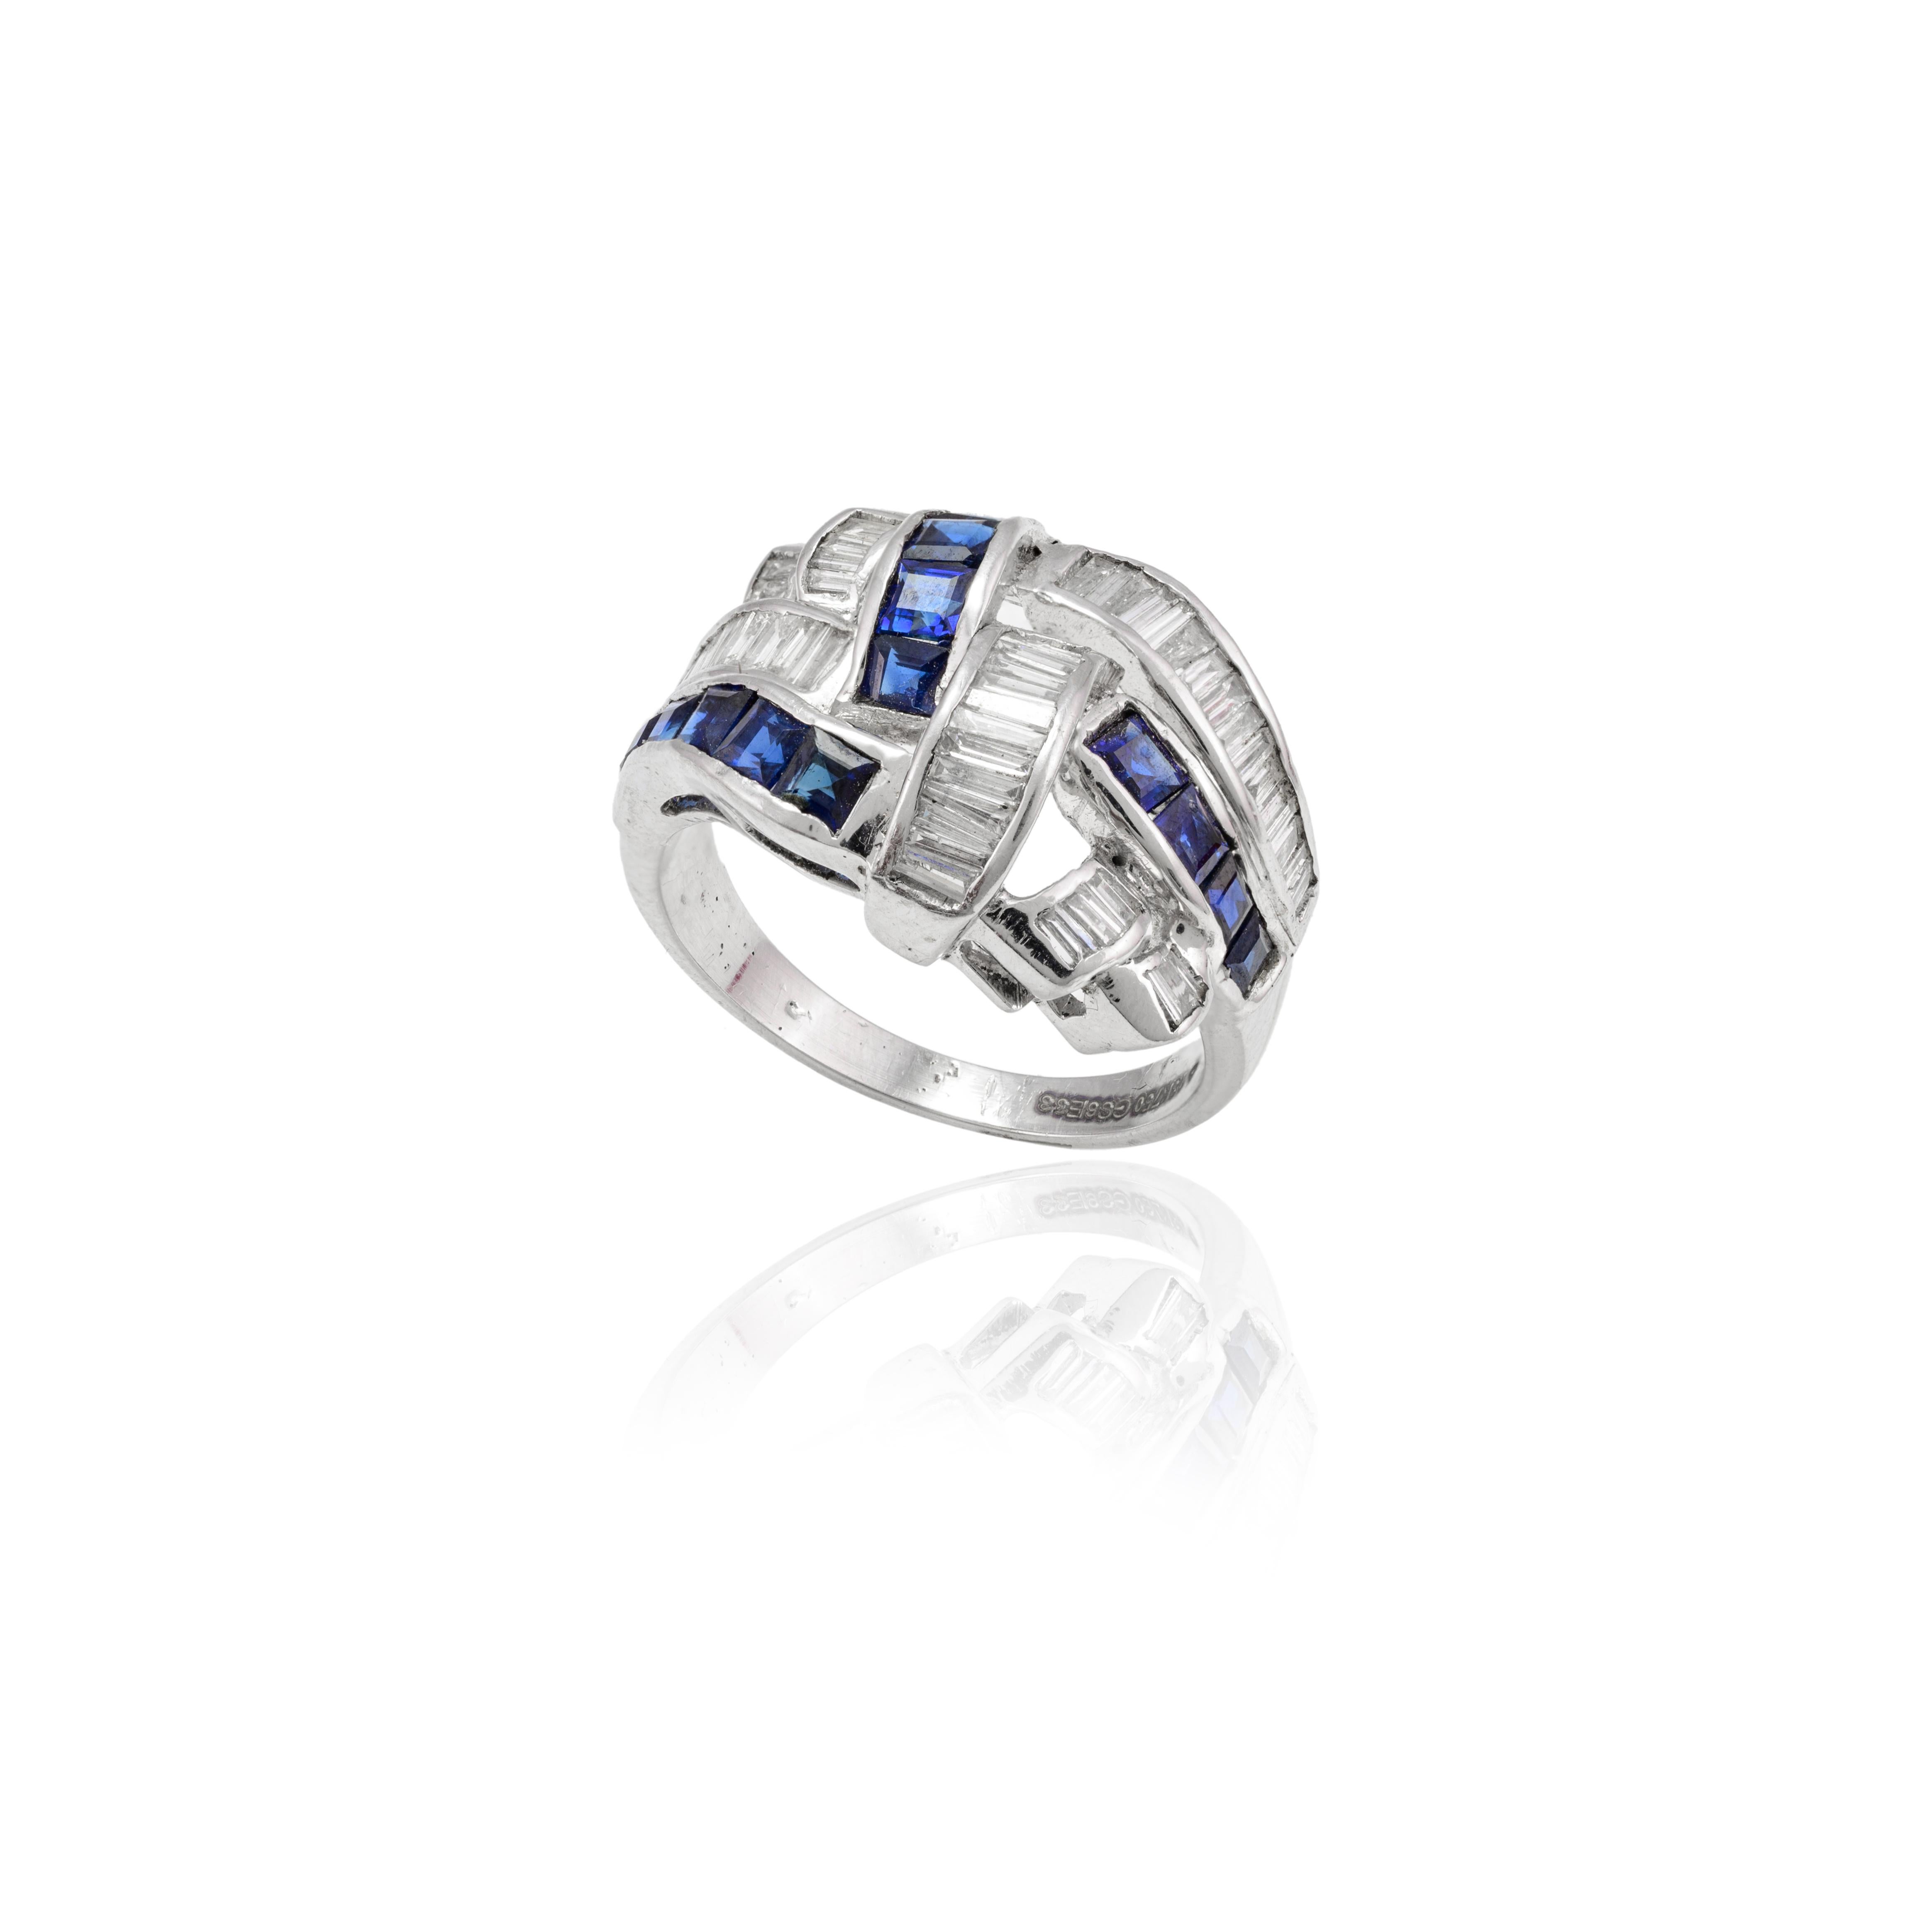 For Sale:  Art Deco 1.3 Carat Blue Sapphire and Diamond Ring in 18k Solid White Gold 2